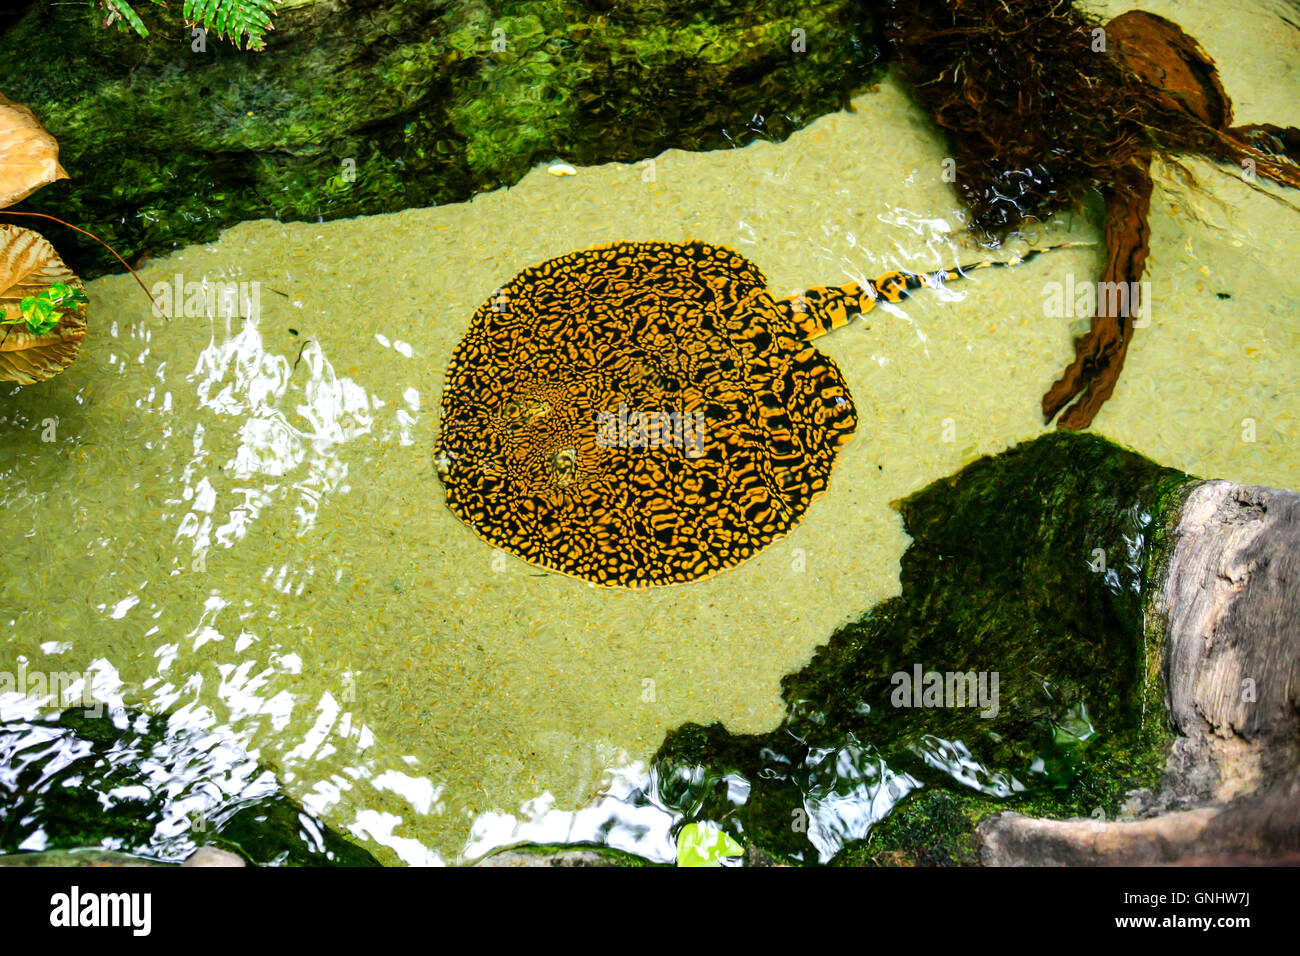 Freshwater Sting Rays of the family Dasyatidae at the Tennessee Aquarium in Chattanooga Stock Photo